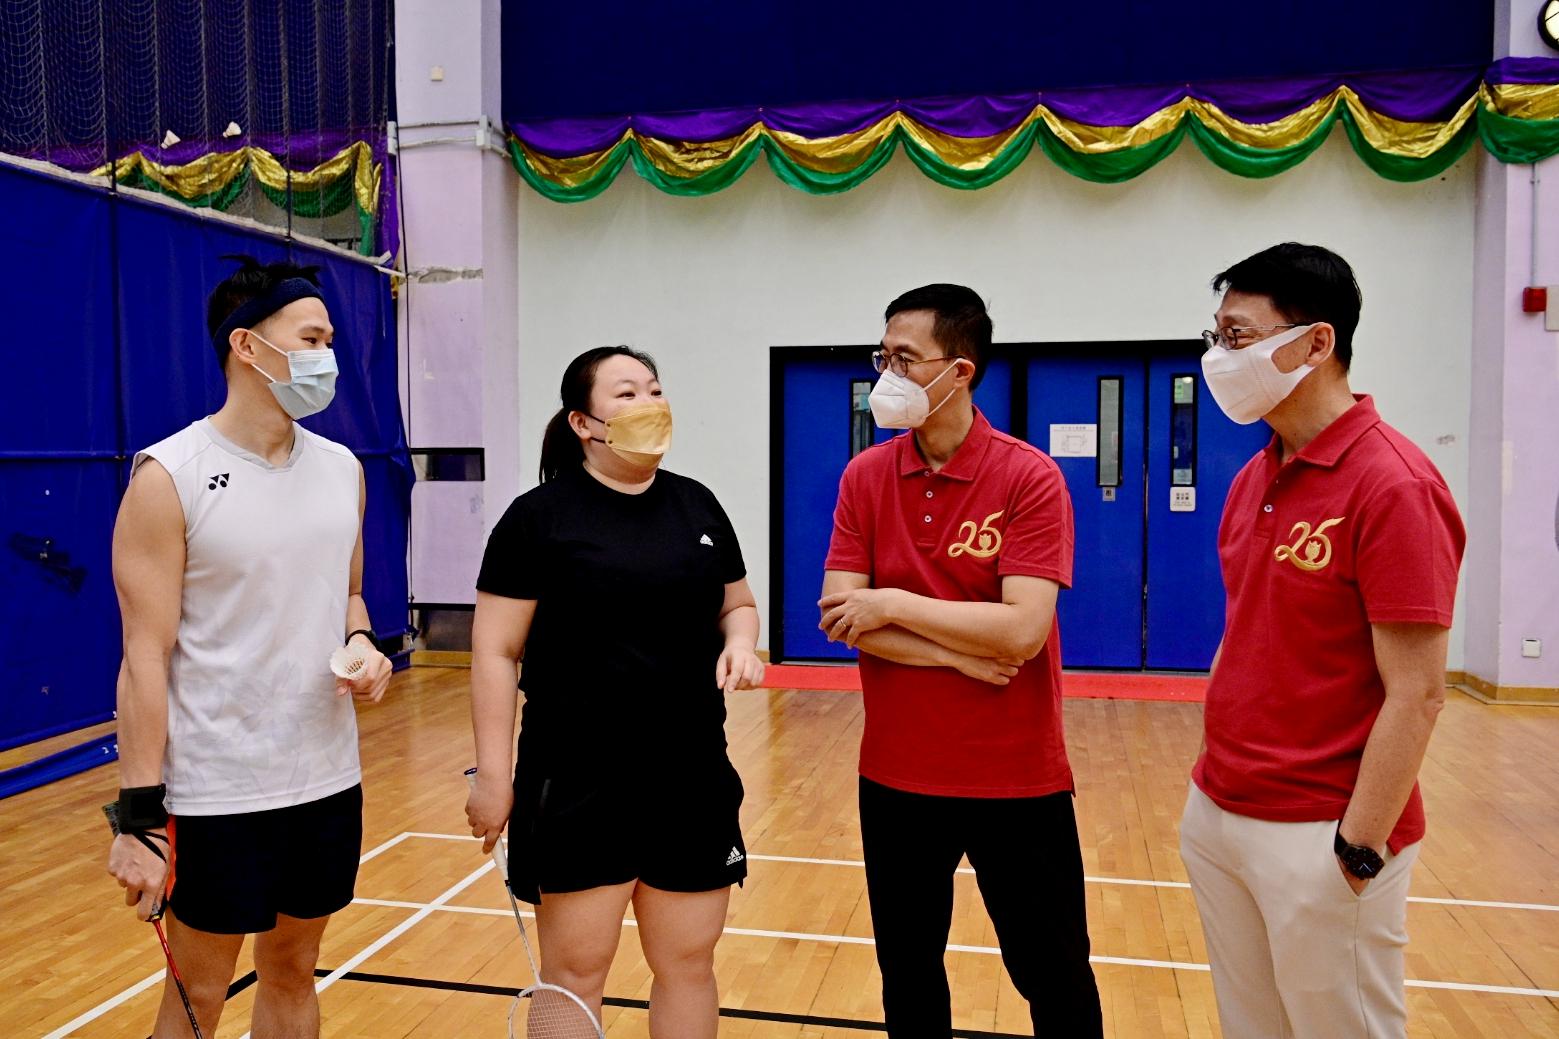 The Secretary for Culture, Sports and Tourism, Mr Kevin Yeung, visited several leisure facilities under the Leisure and Cultural Services Department today (July 1). Photo shows Mr Yeung (second right) talking with members of the public who were playing badminton at Tseung Kwan O Sports Centre, to learn more about their views on the booking and usage of the facilities.